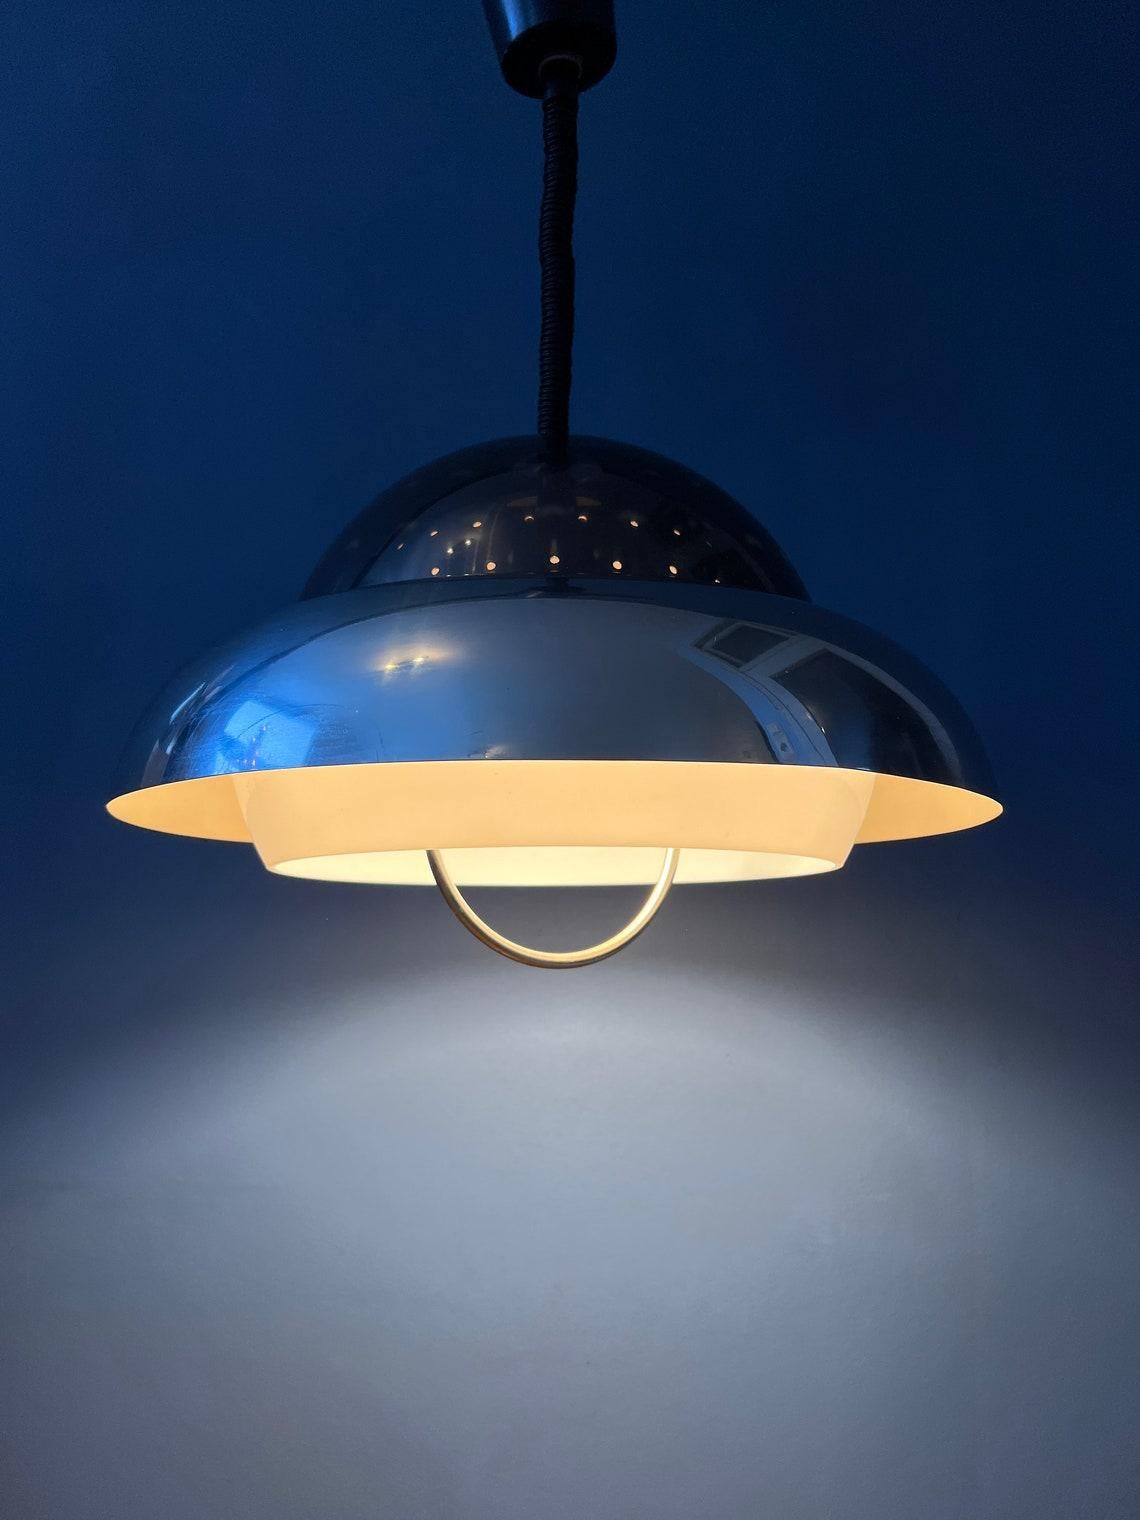 Dijkstra space age pendant lamp with acrylic glass 'dome' and chrome outer layer. The lamp has an acrylic glass outer shade and an aluminium inner shade. Together they create a magnificent space age-effect. The lamp requires one E27/26